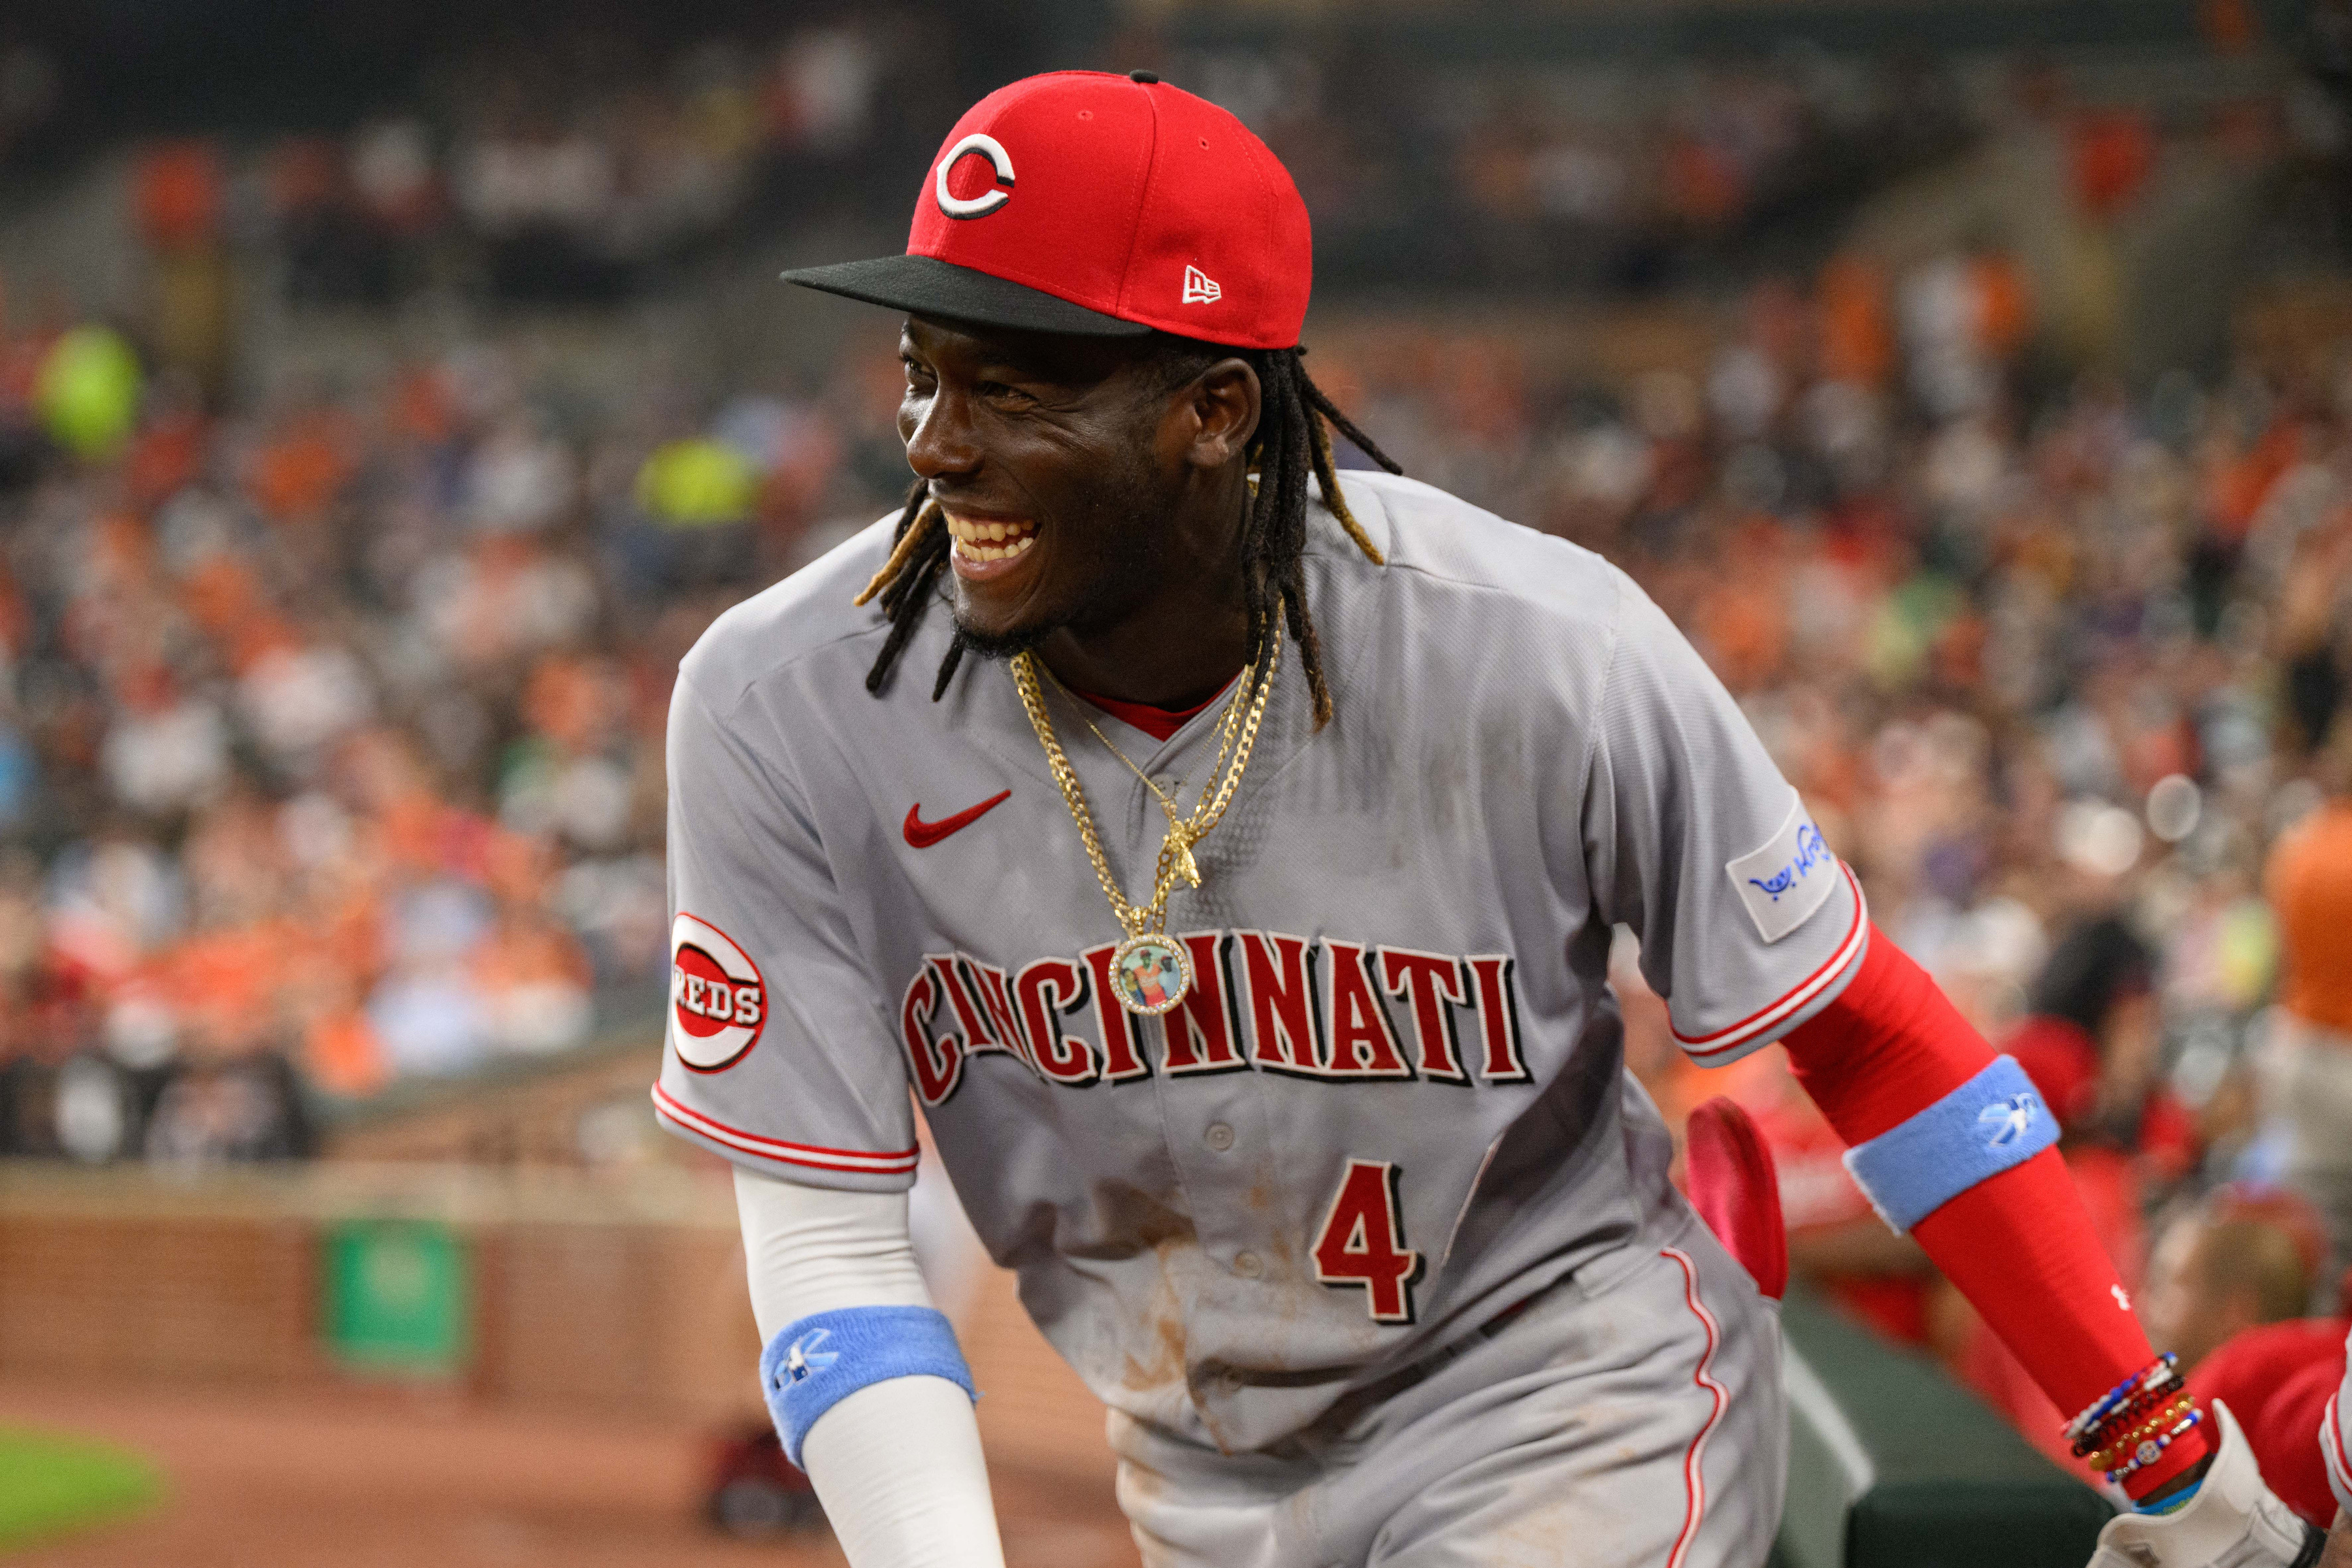 Reds beat Orioles 11-7 with 4 runs in 10th inning - The Tribune